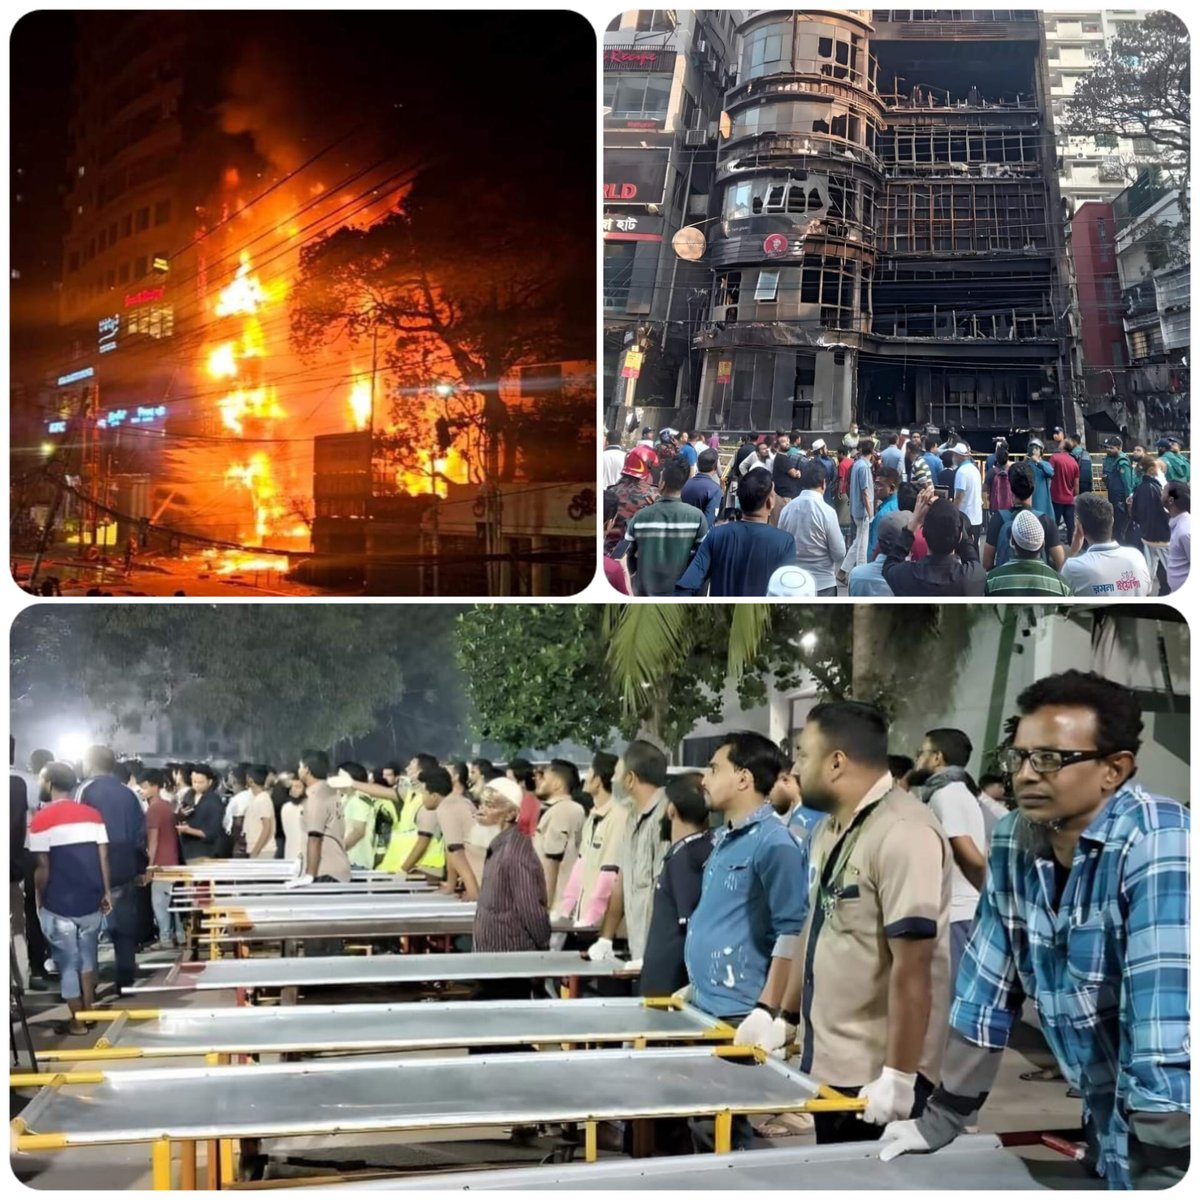 The loss of at least 45 lives in the Dhaka fire tragedy is heartbreaking. My deepest condolences to the affected families, and thoughts and prayers for everyone who has lost loved ones or had their lives turned upside down. With fires becoming more frequent in Bangladesh,